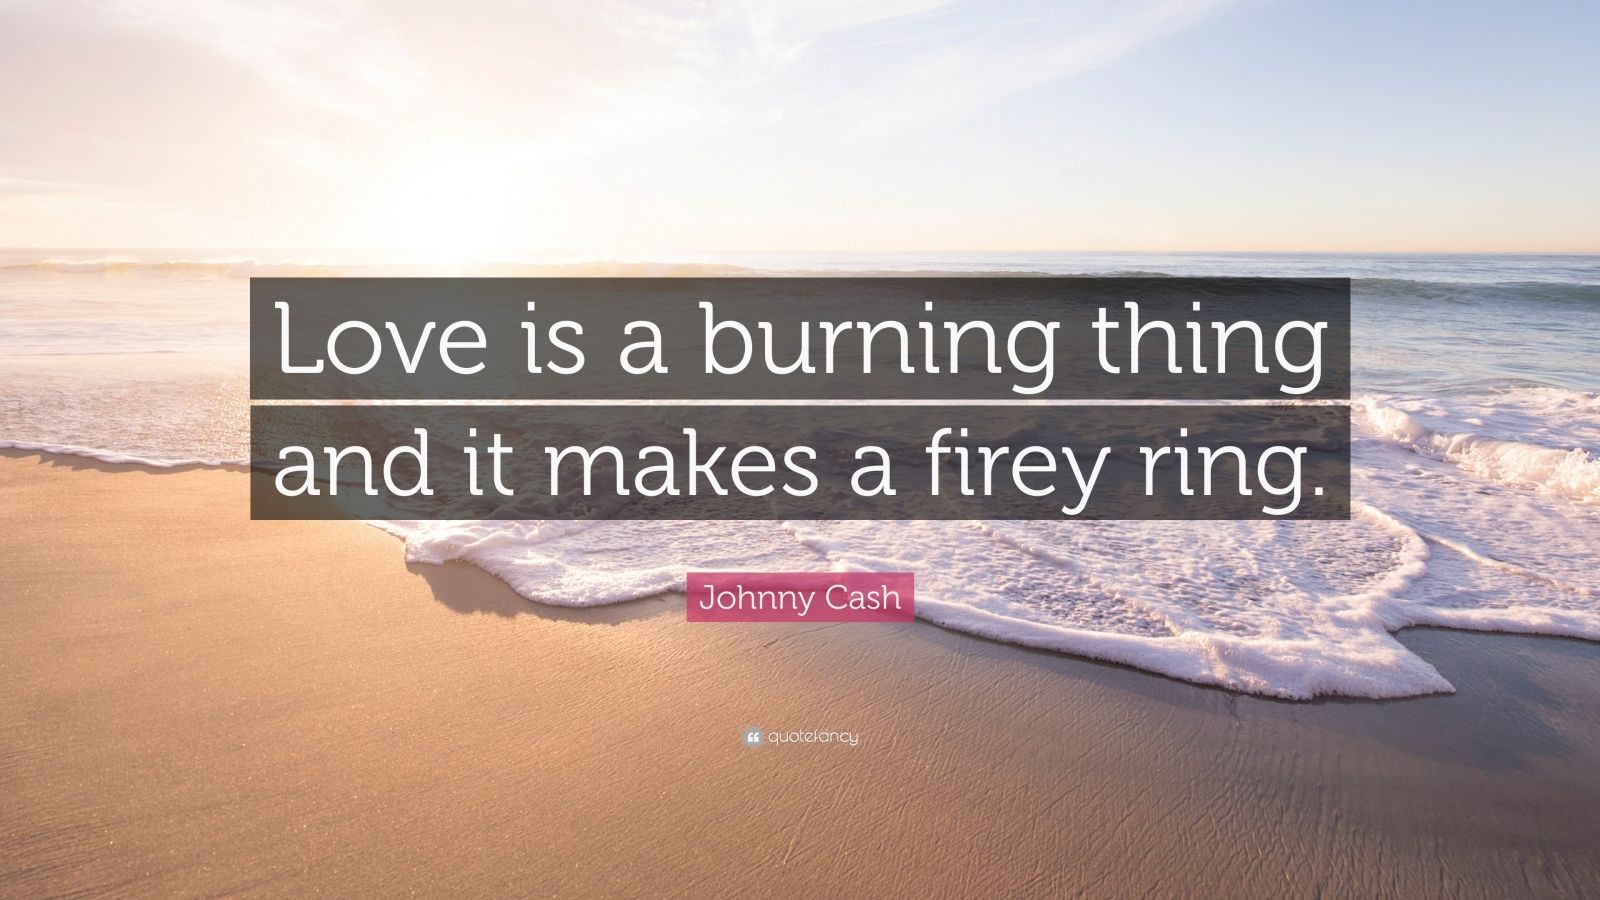 Johnny Cash Quote “Love is a burning thing and it makes a